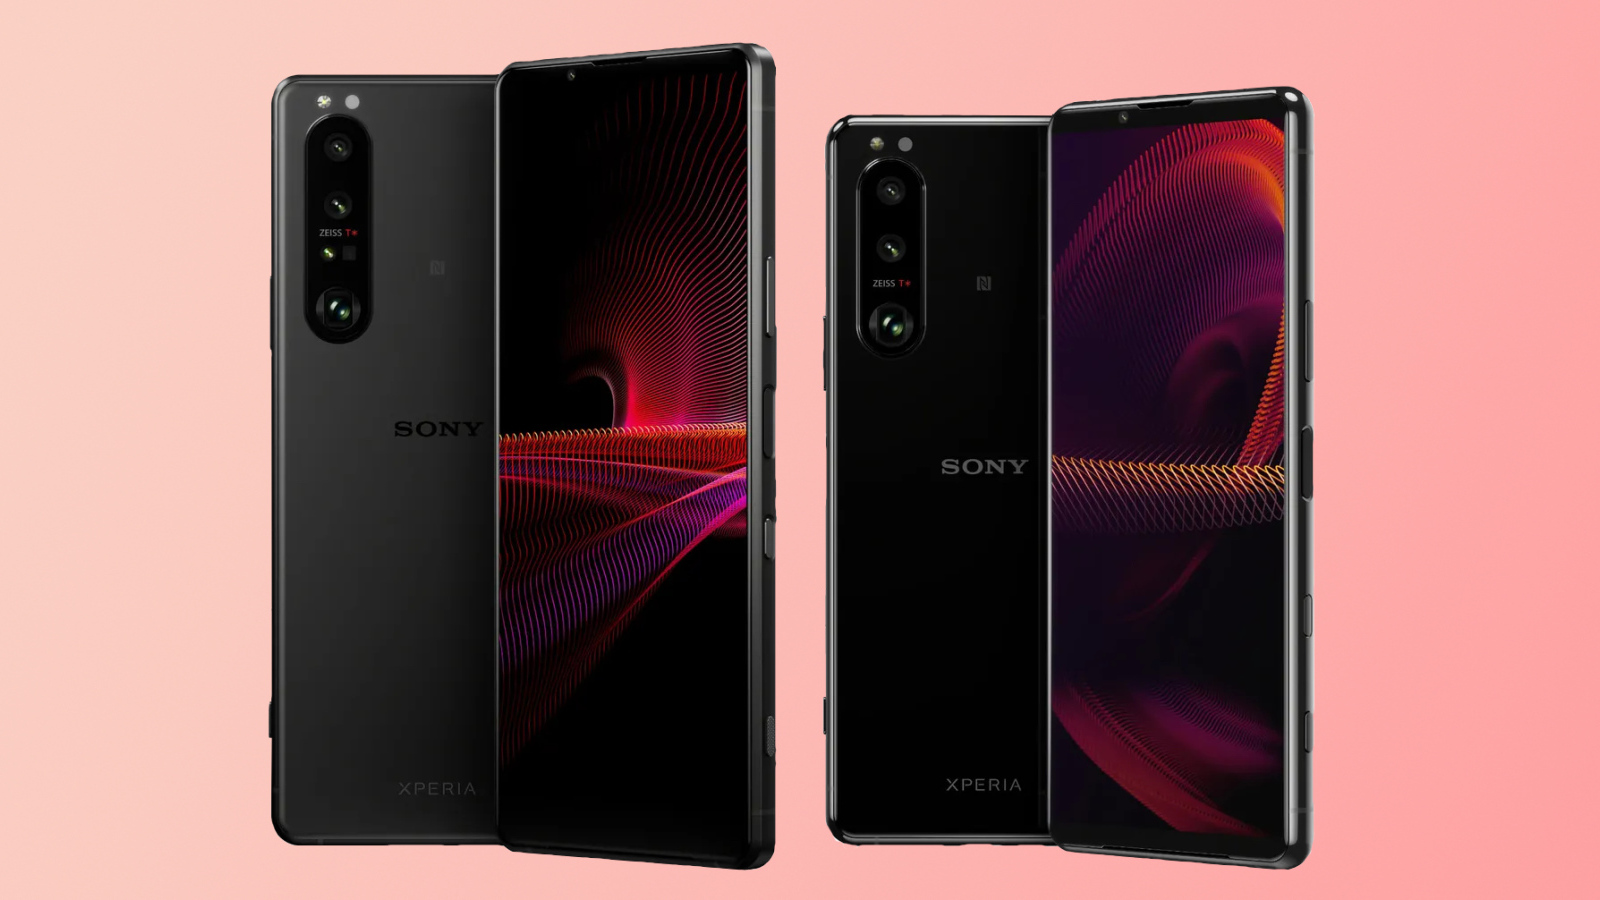 Stylish slim smartphones Sony Xperia 1 on a pink background